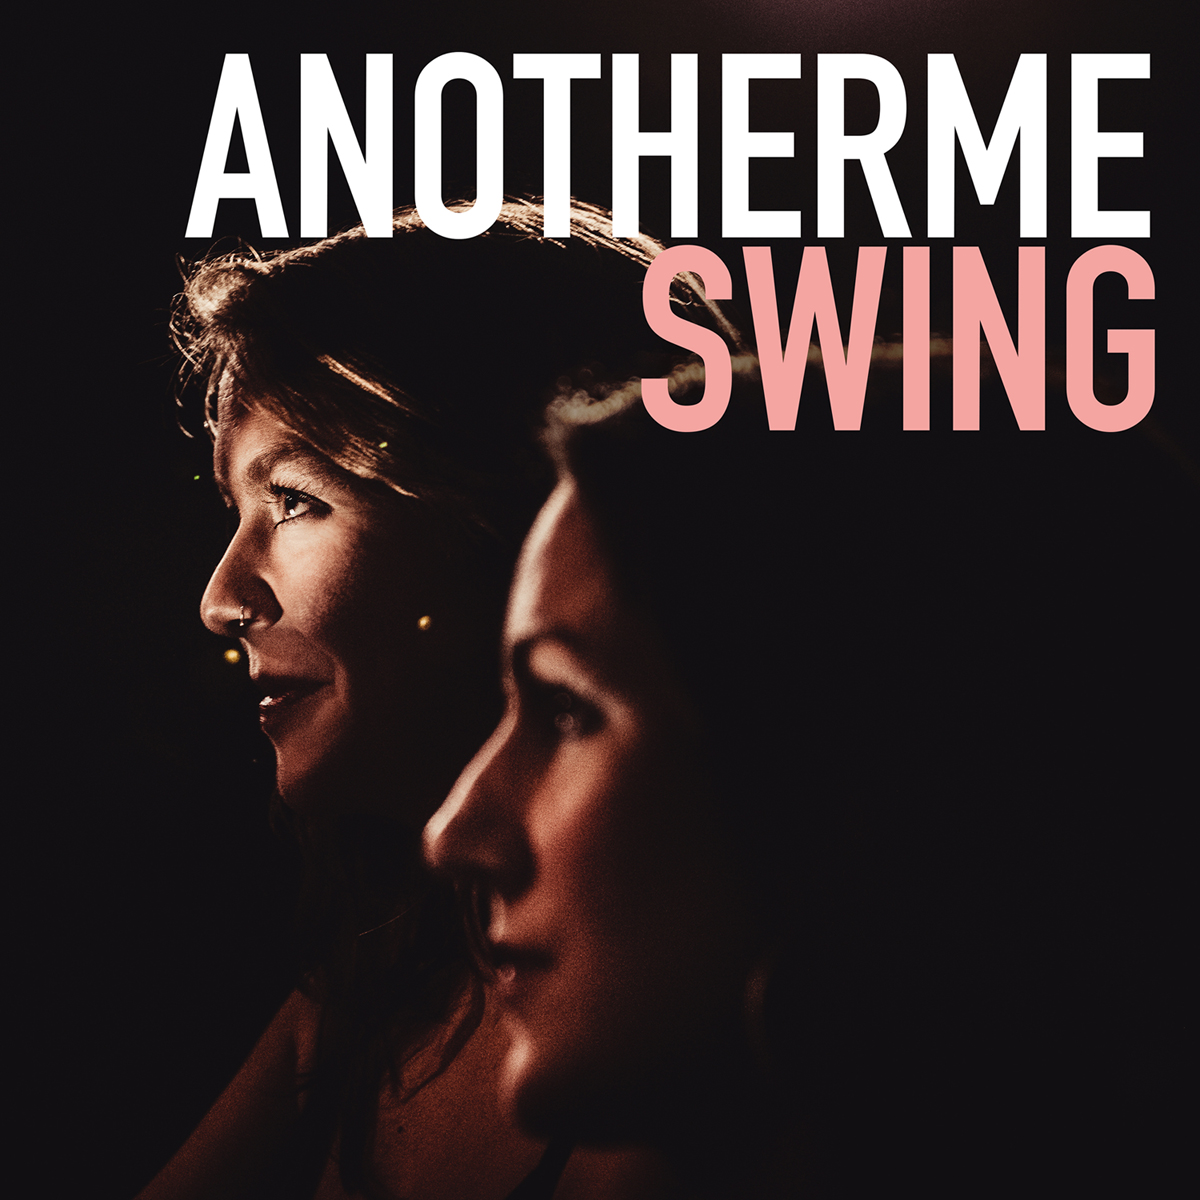 http://anotherme.ch/wp-content/uploads/2020/09/ANOTHER-ME_Cover_SWING.jpg